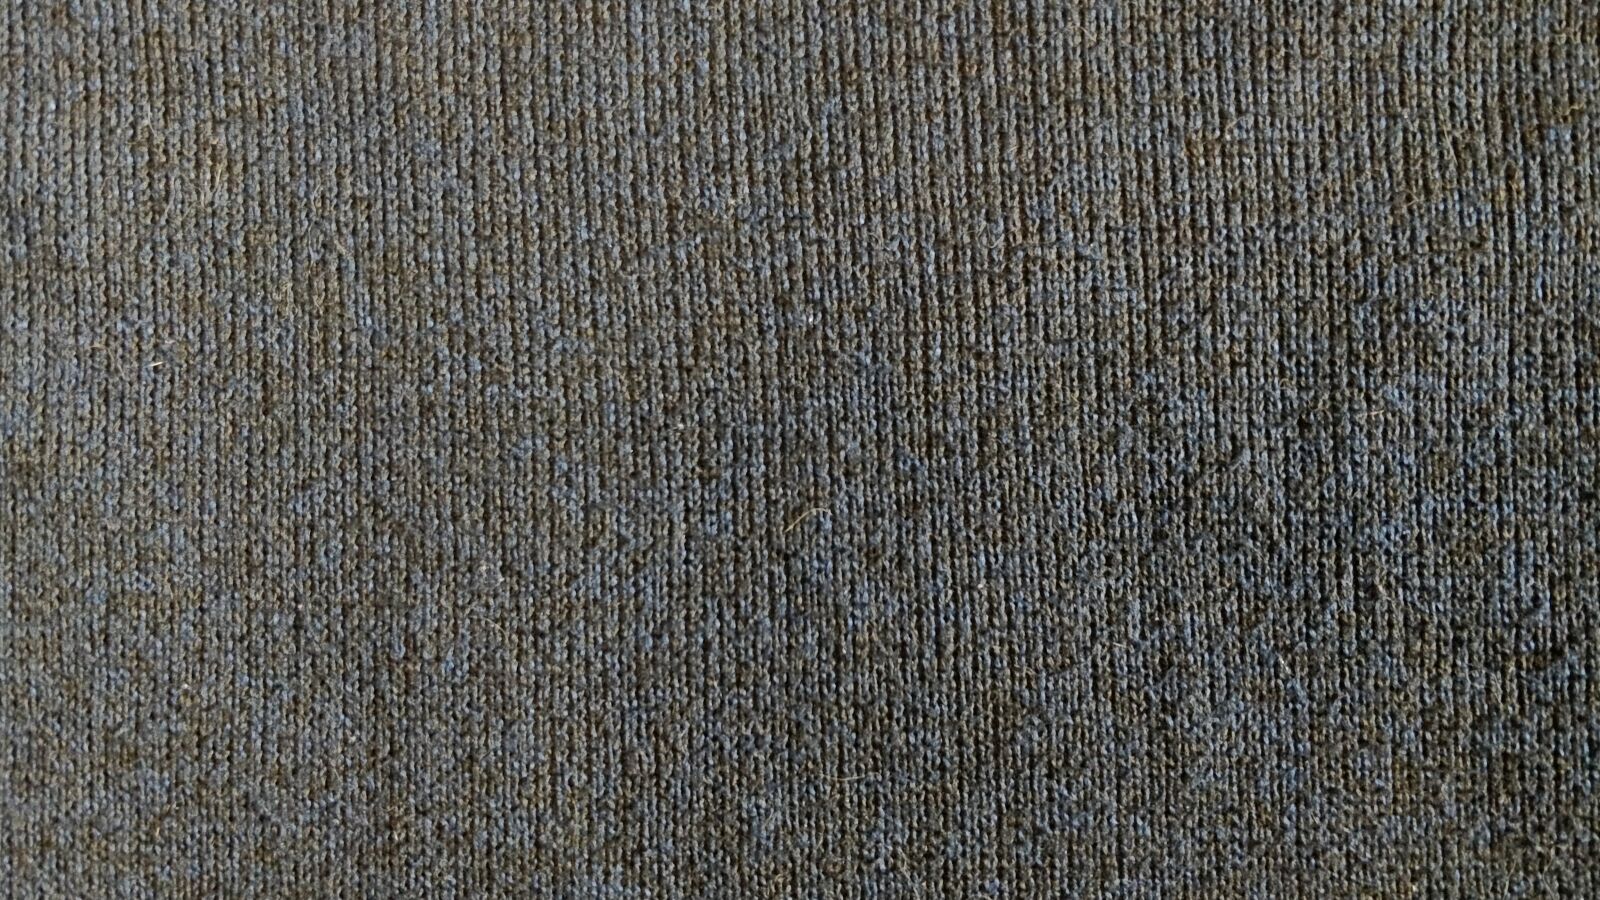 OnePlus 5 sample photo. Fabric, pattern, texture photography